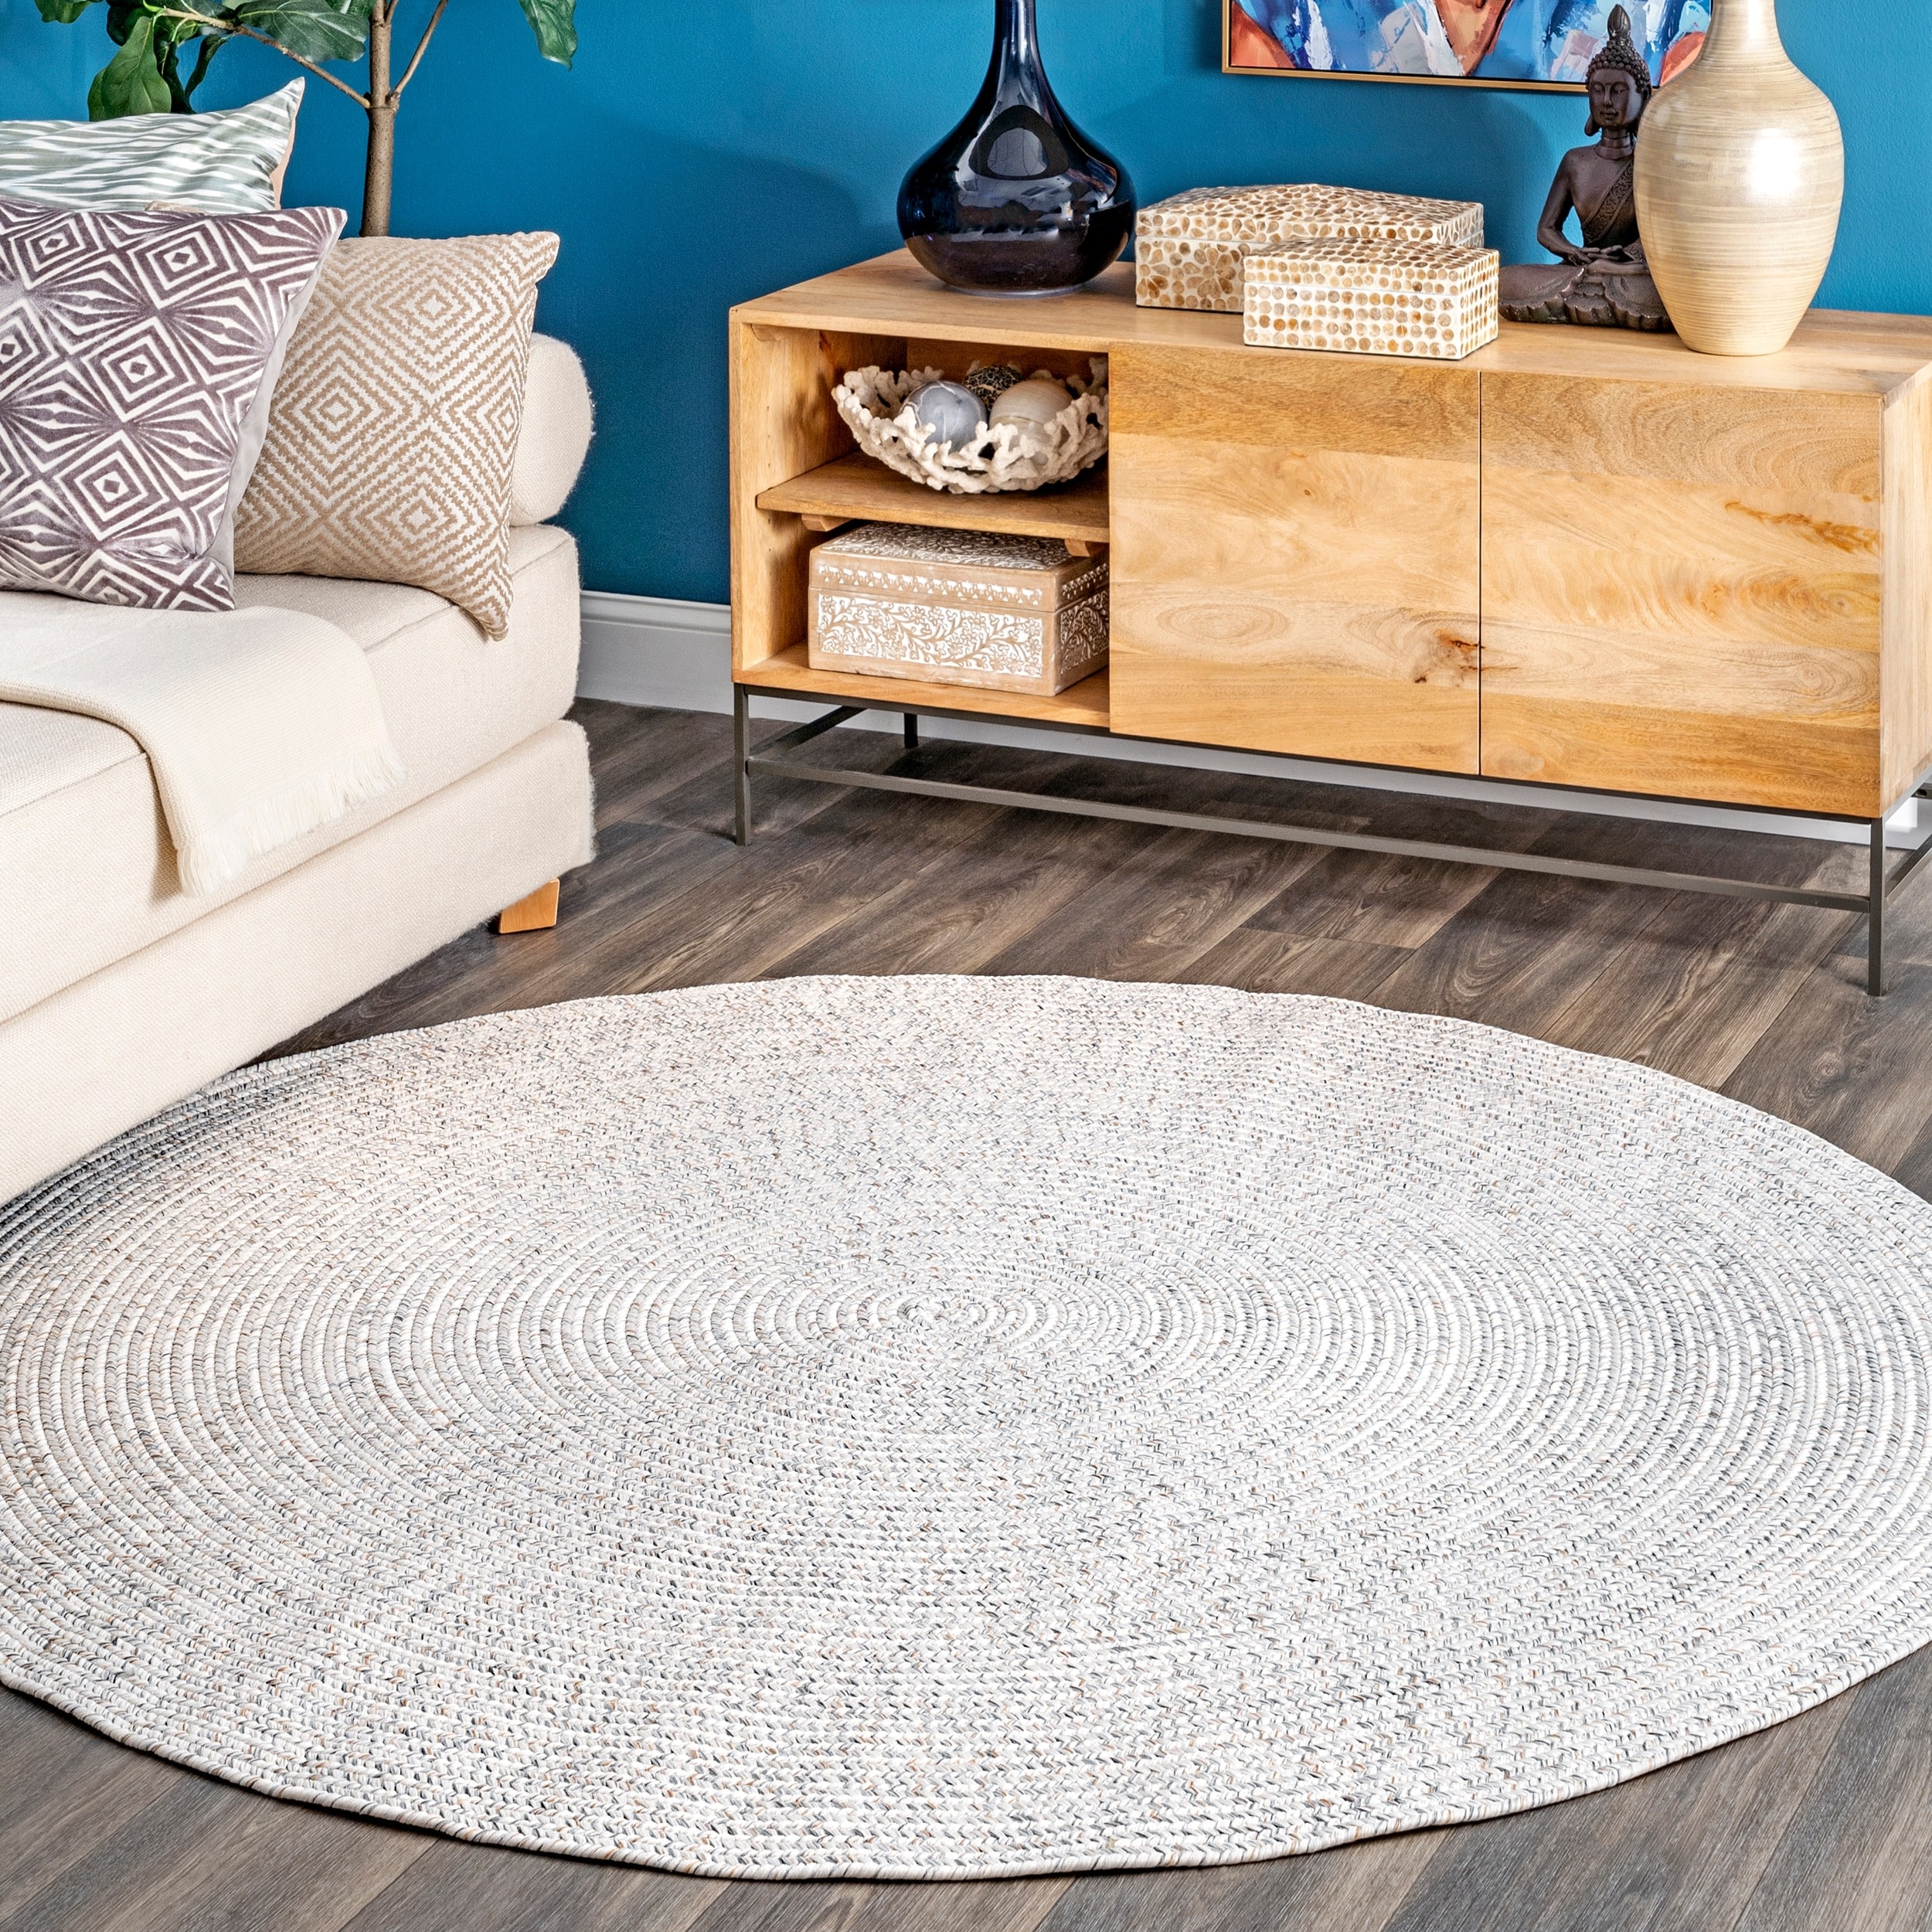 Solid Shag Solid Oval 8x10 Oval Rug Snow White